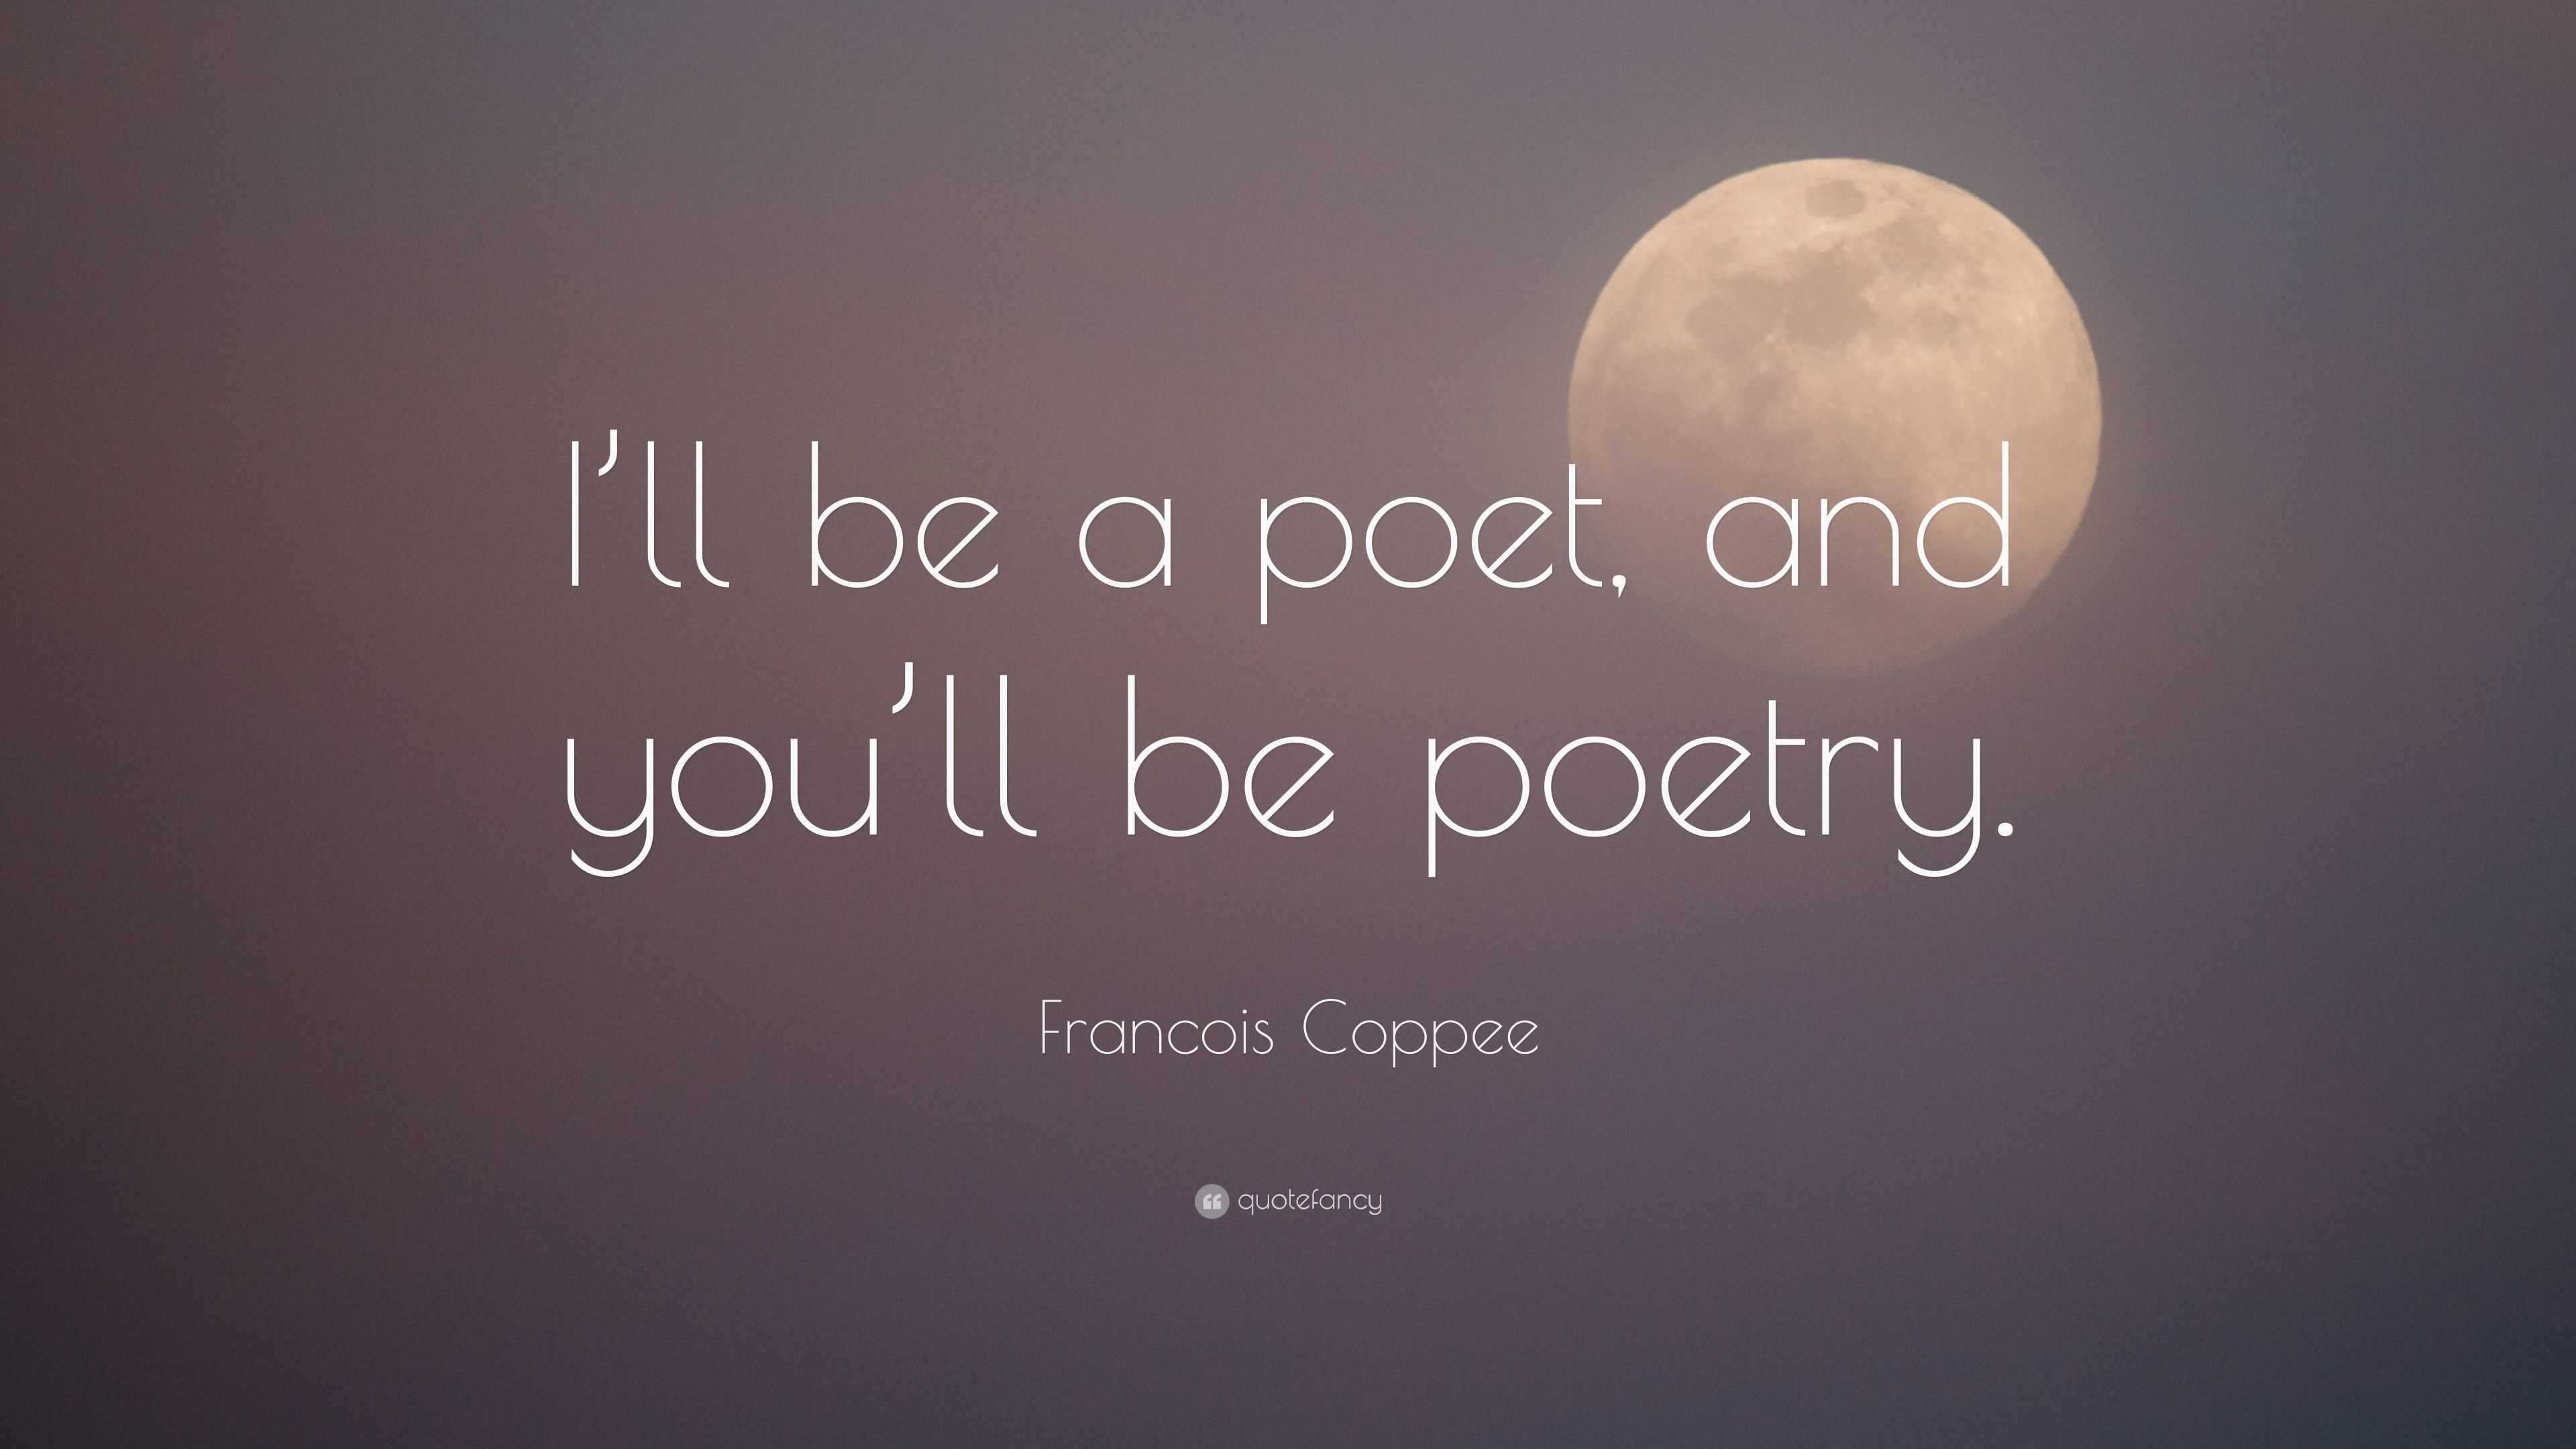 Francois Coppee Quote: “I’ll be a poet, and you’ll be poetry.”